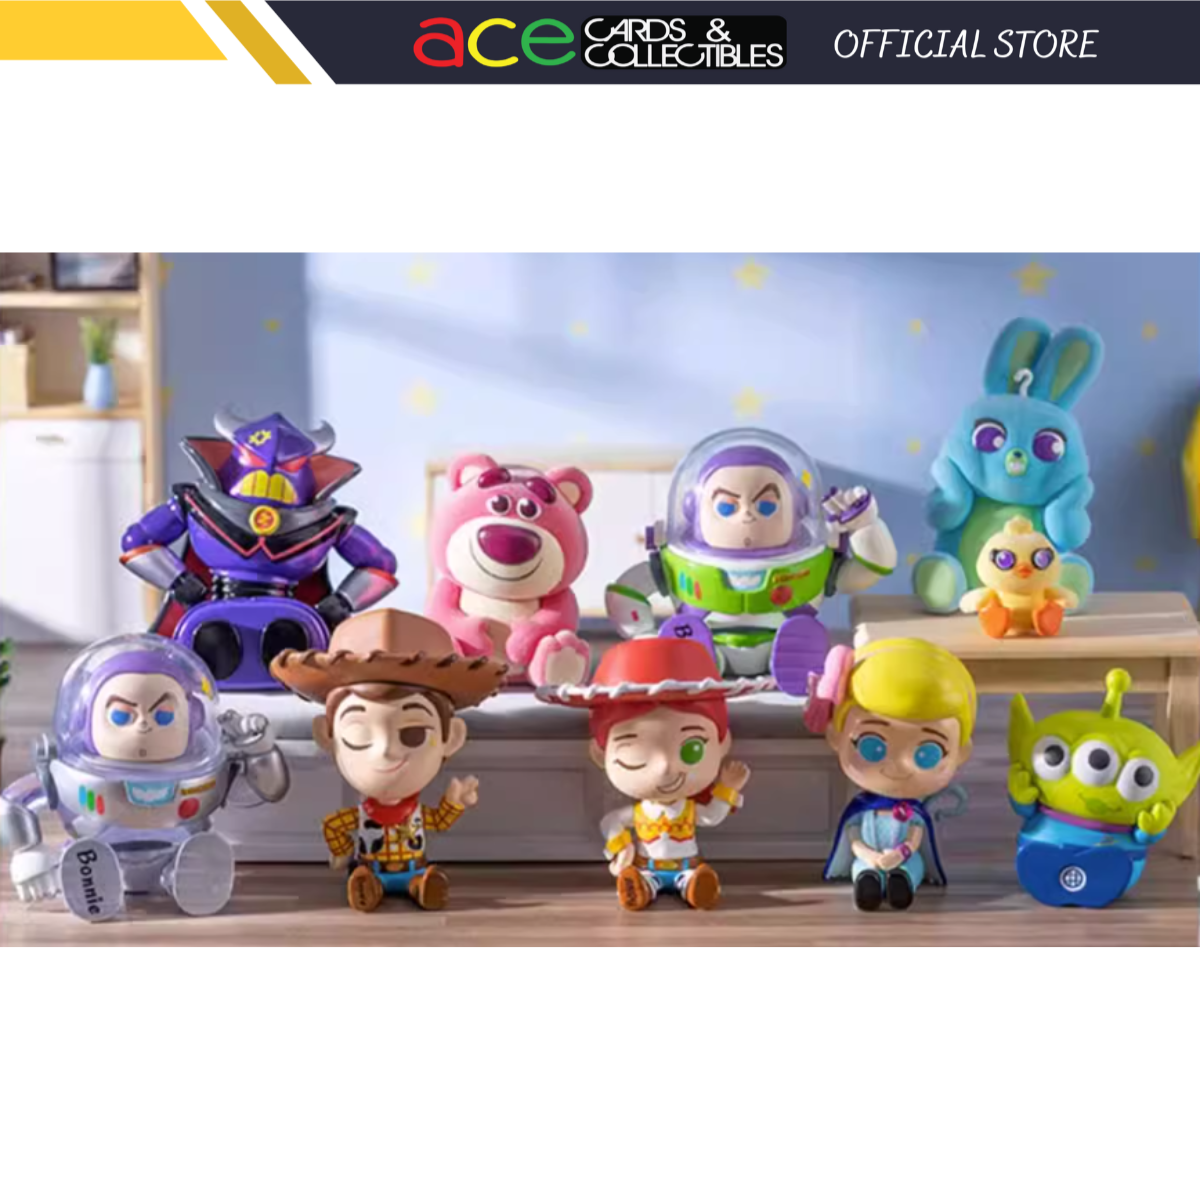 Miniso x Disney Toy Story Sit Nicely Series-Single Box (Random)-Miniso-Ace Cards &amp; Collectibles